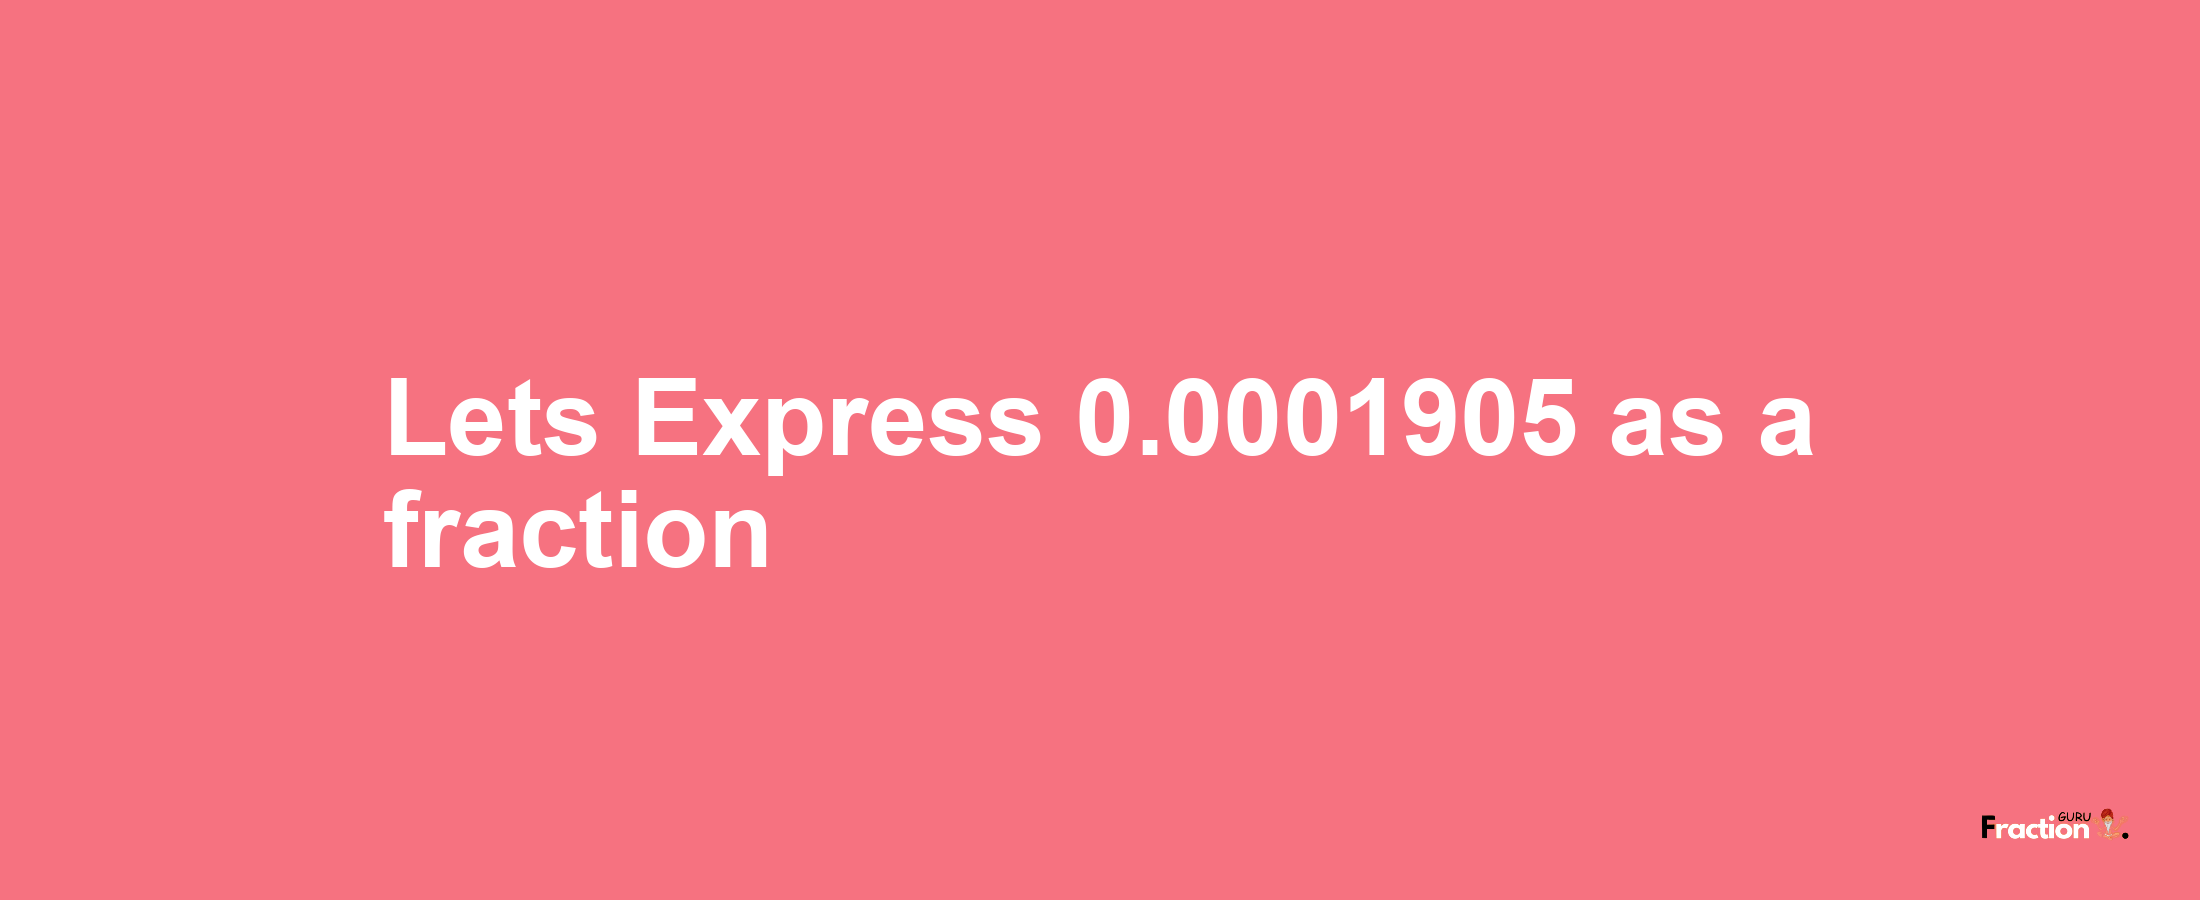 Lets Express 0.0001905 as afraction